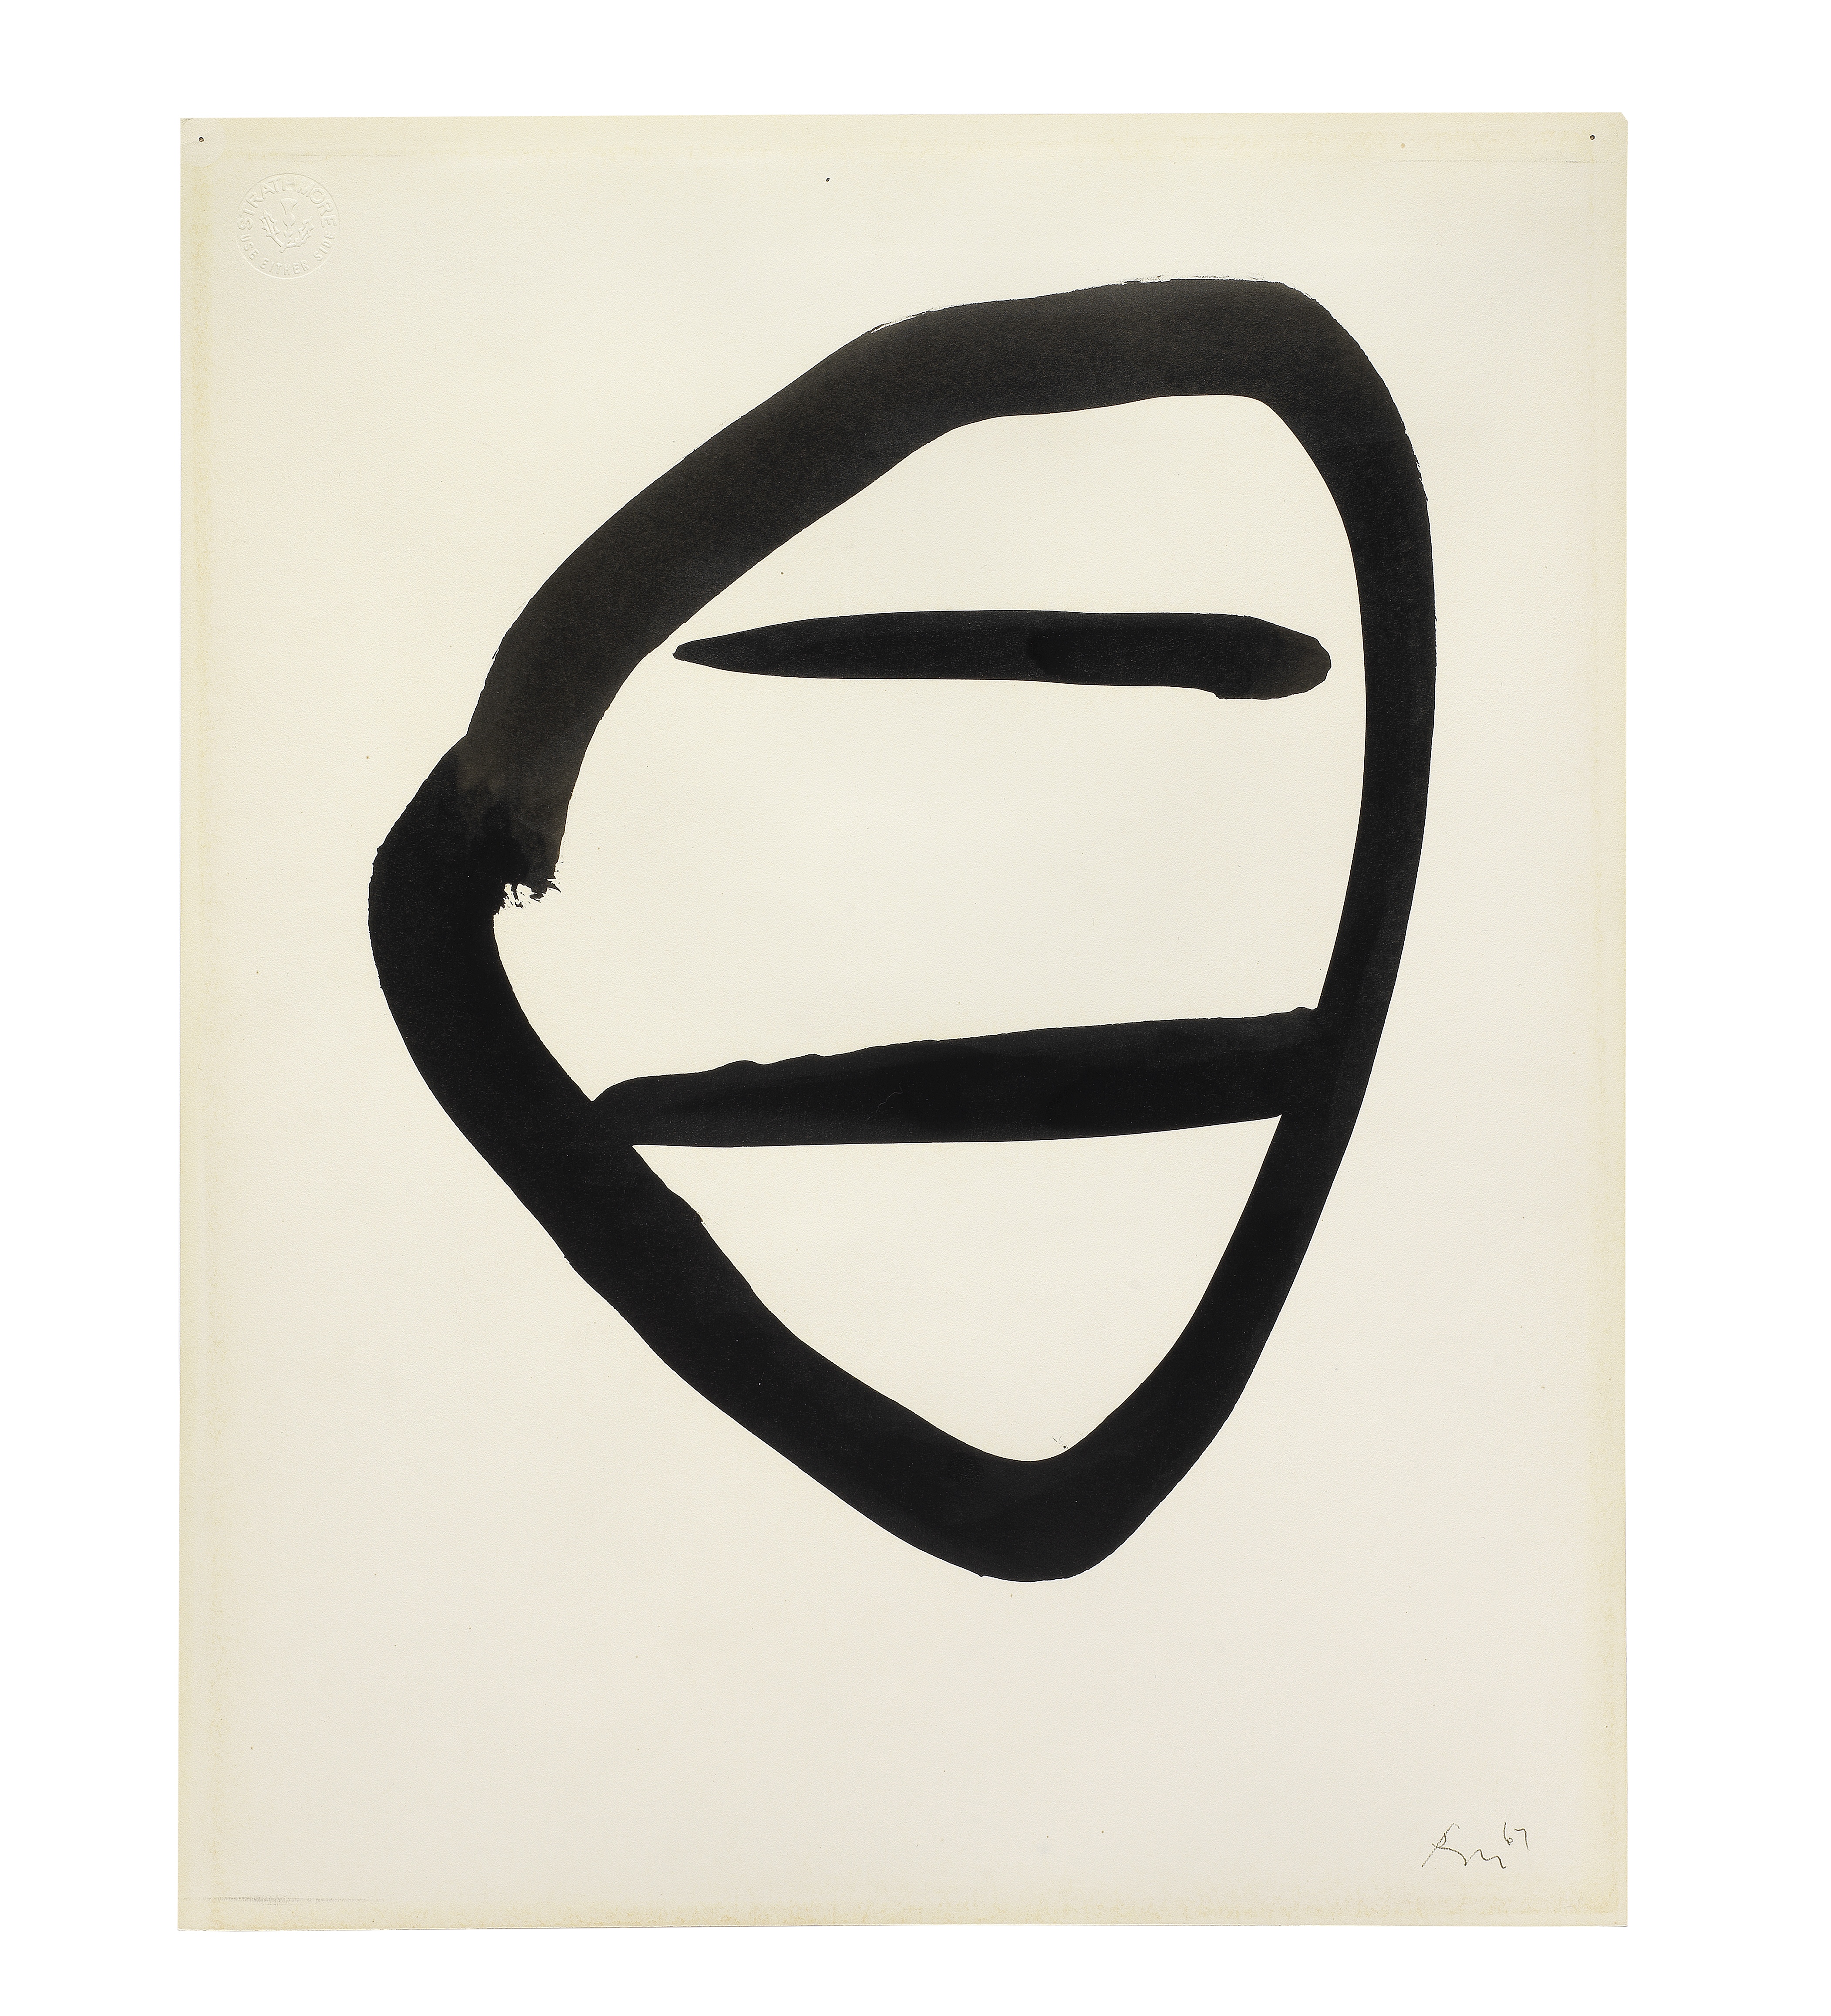 Robert Motherwell (American, 1915-1991) Untitled Black on White Drawing #2 1967